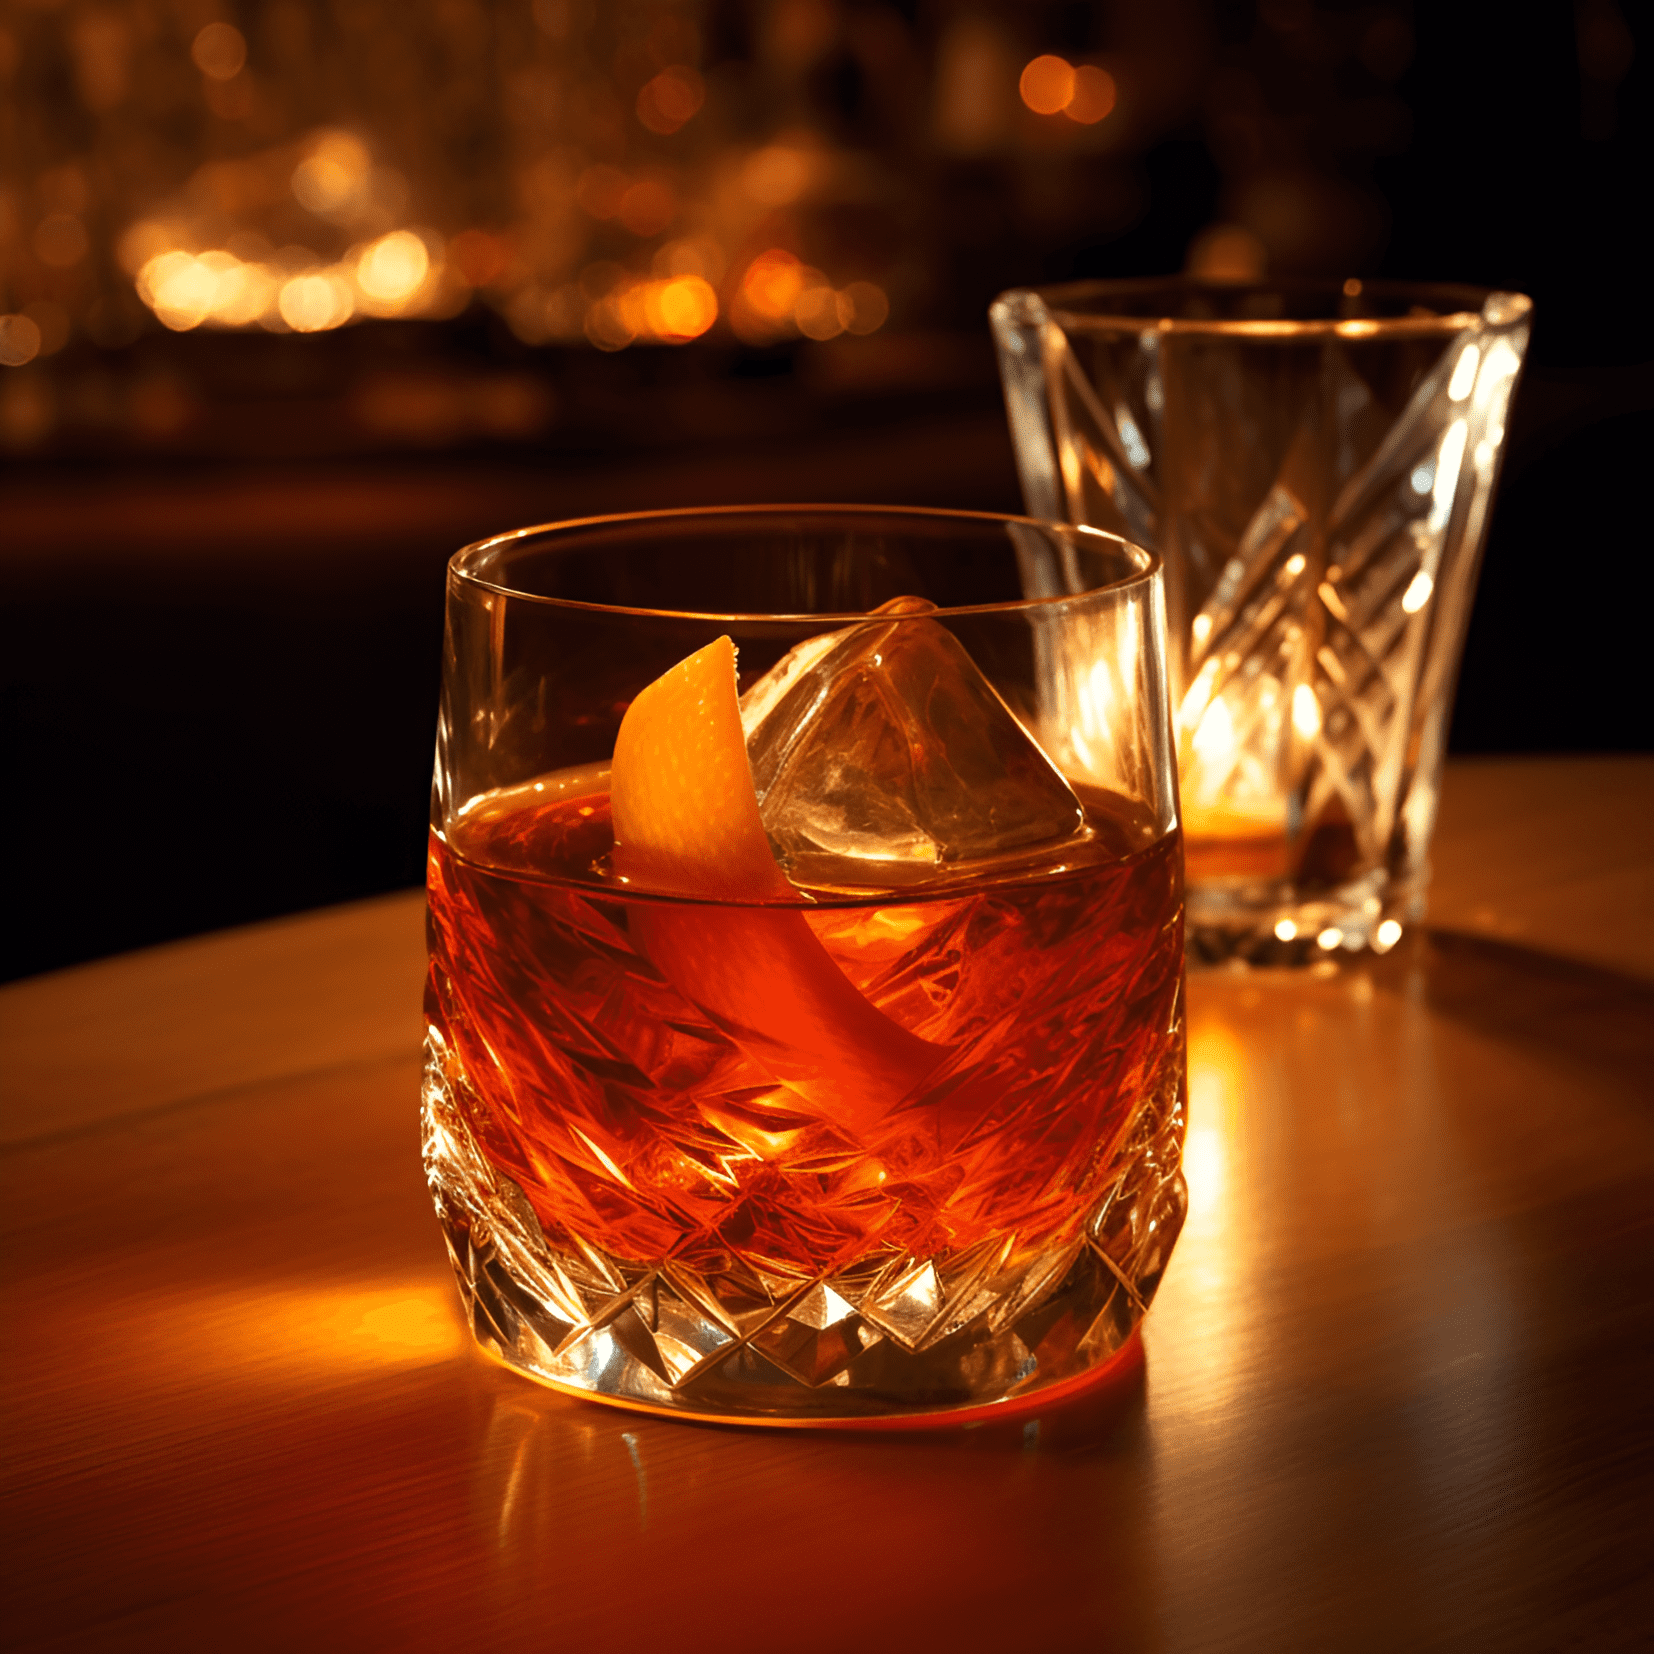 Nelson's Blood cocktail has a rich, bold, and complex taste. It is both sweet and slightly bitter, with a strong presence of dark, aged spirits. The cocktail is warming and full-bodied, with a smooth finish.